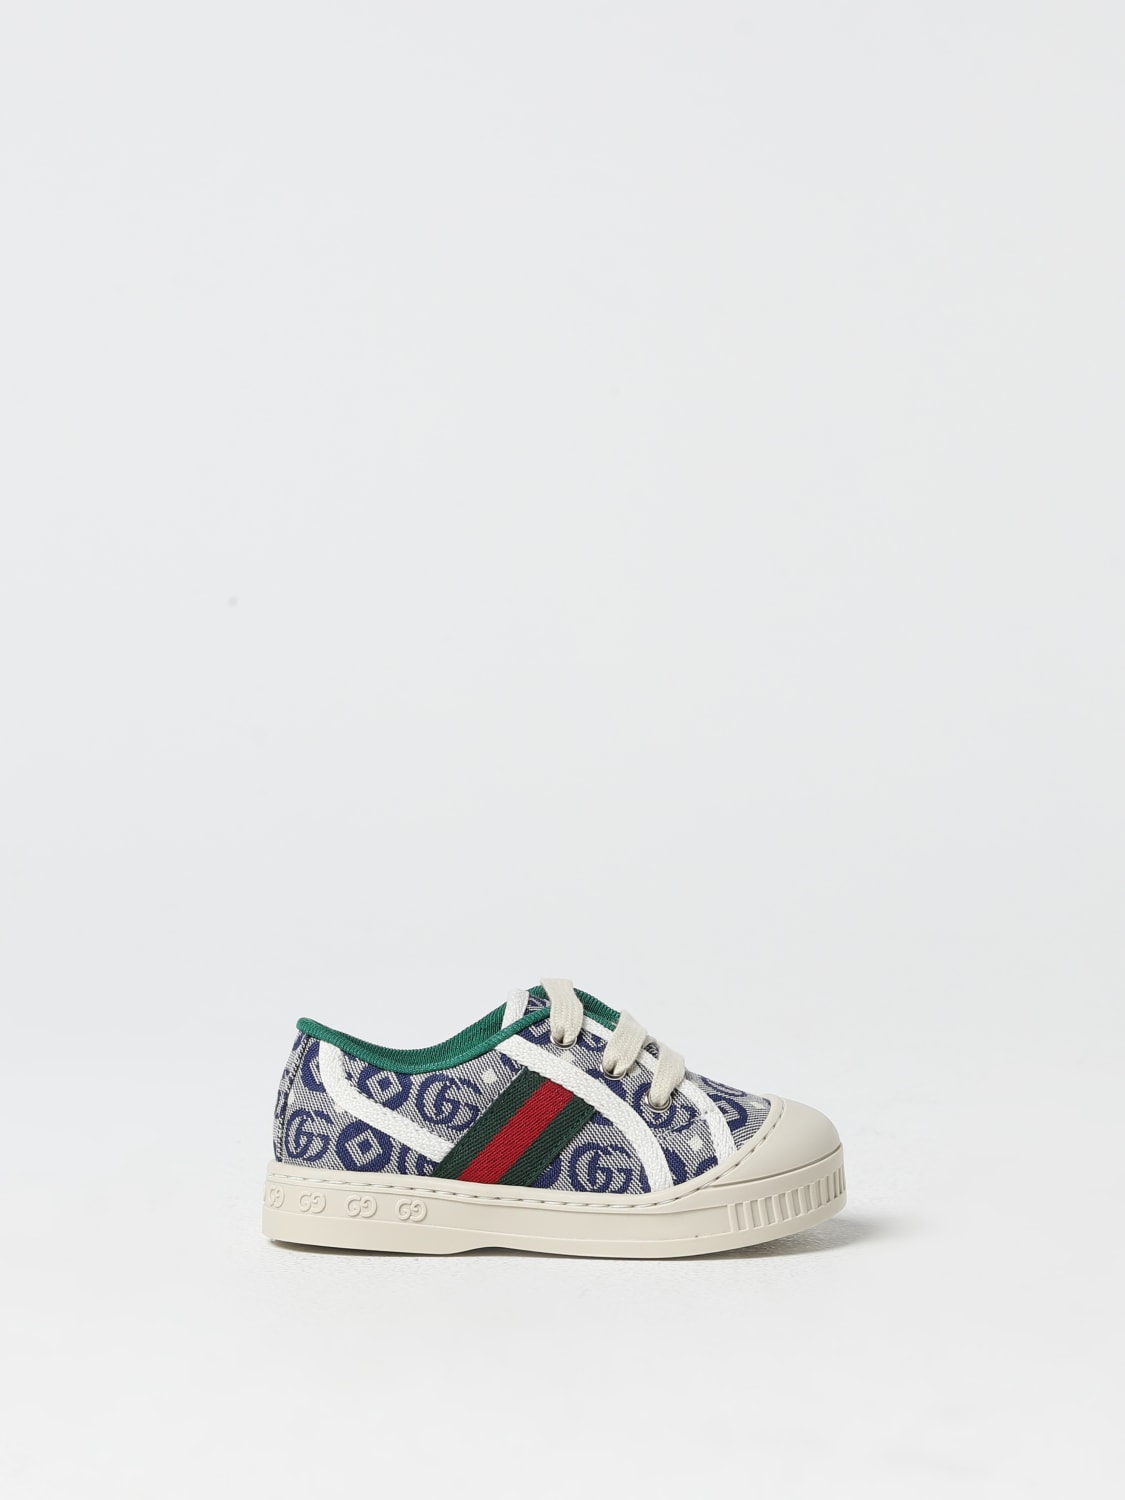 GUCCI 1977 Tennis sneakers in cotton with jacquard monogram